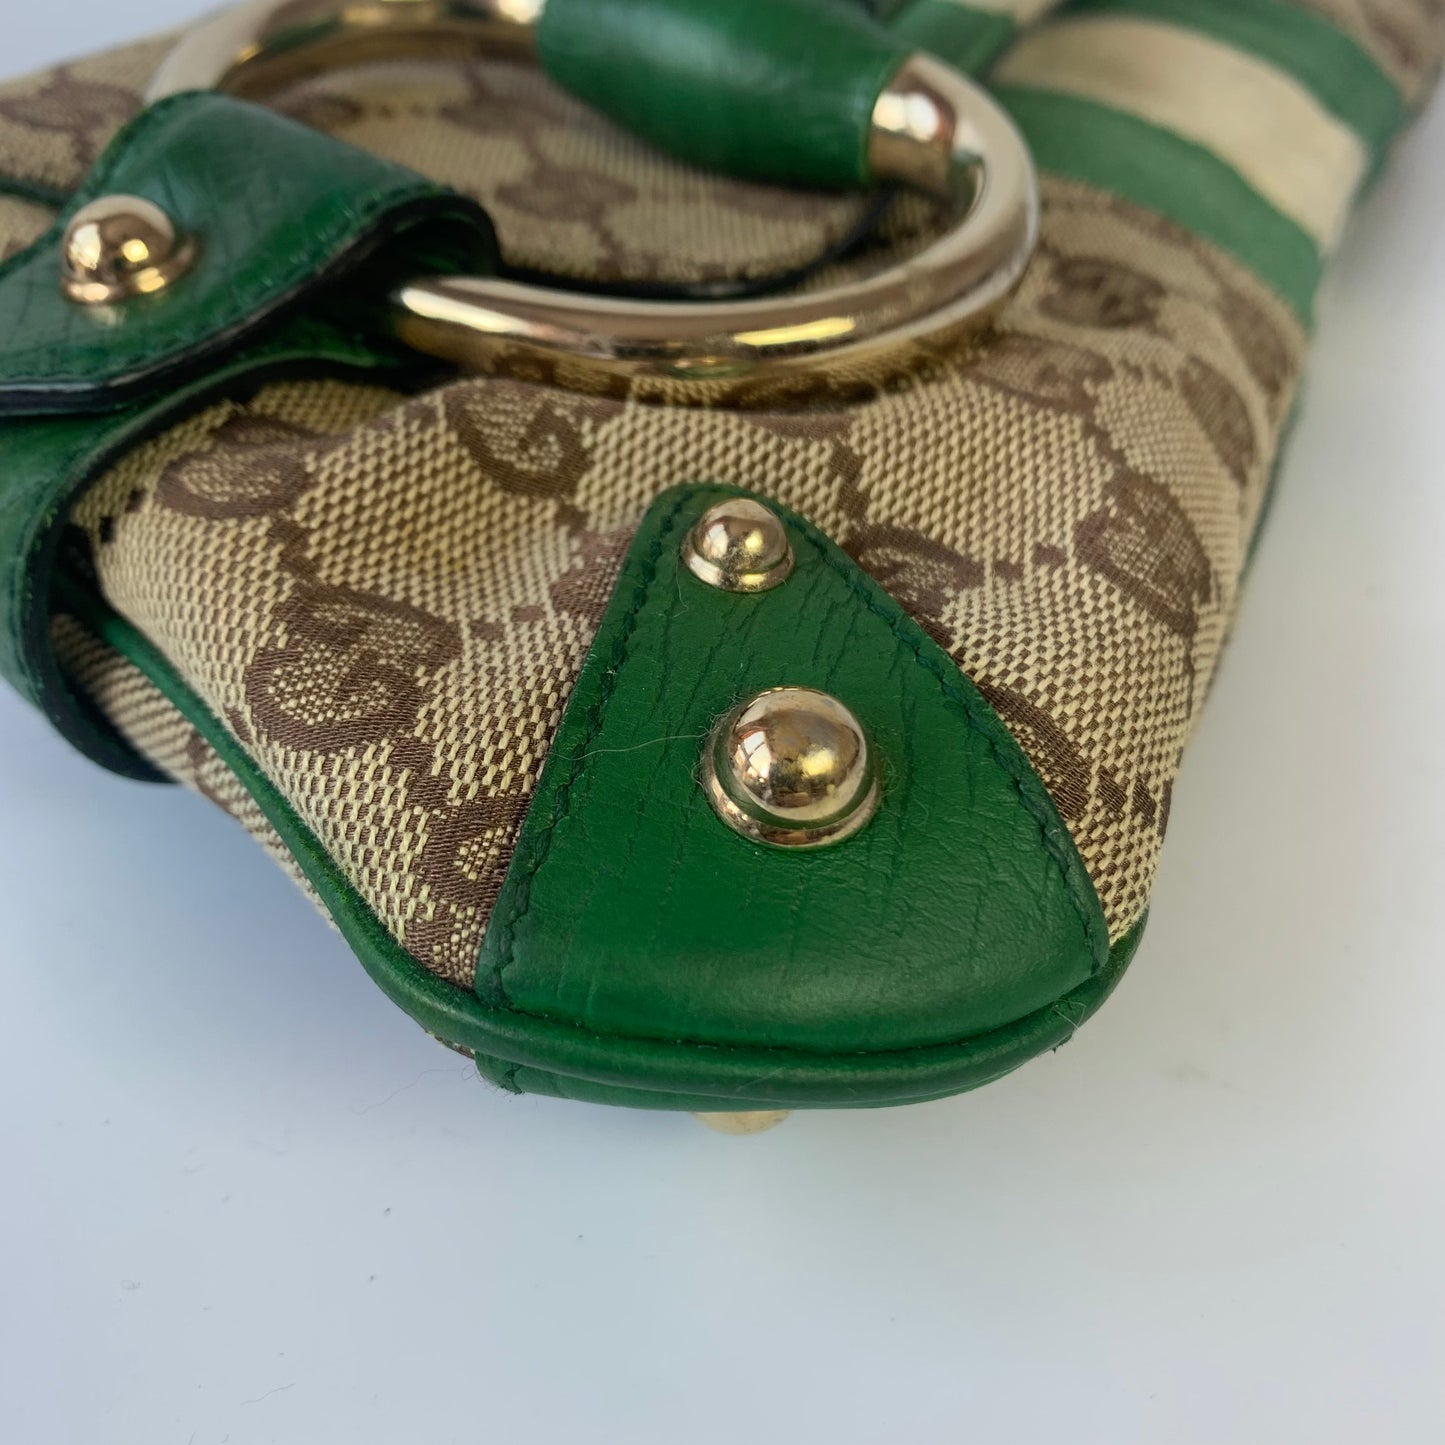 Iconic Gucci Horsebit 1955 Chain Cloth Gucci Monogram Green Leather and Gold Studs